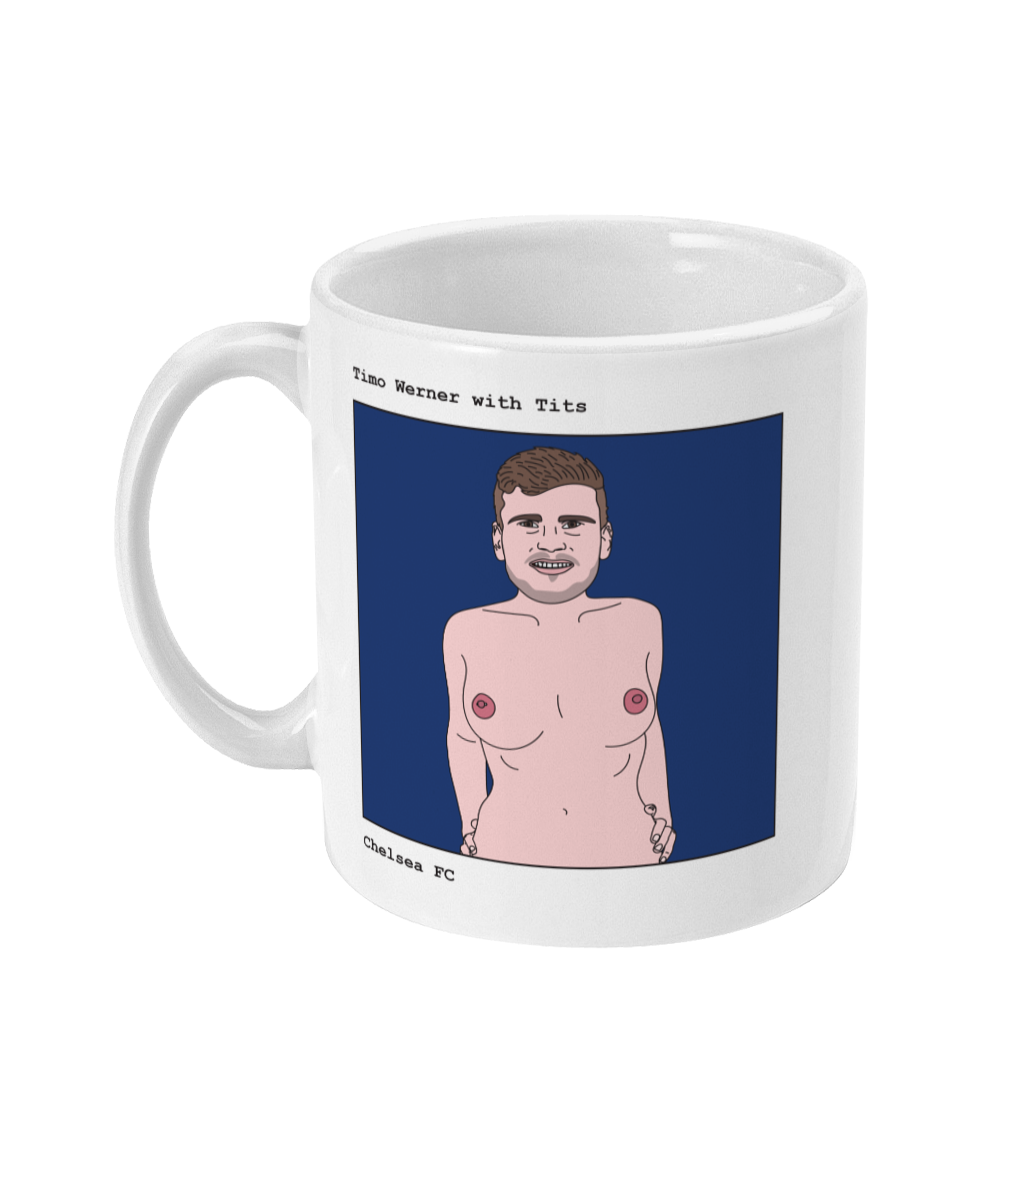 Timo Werner with Tits